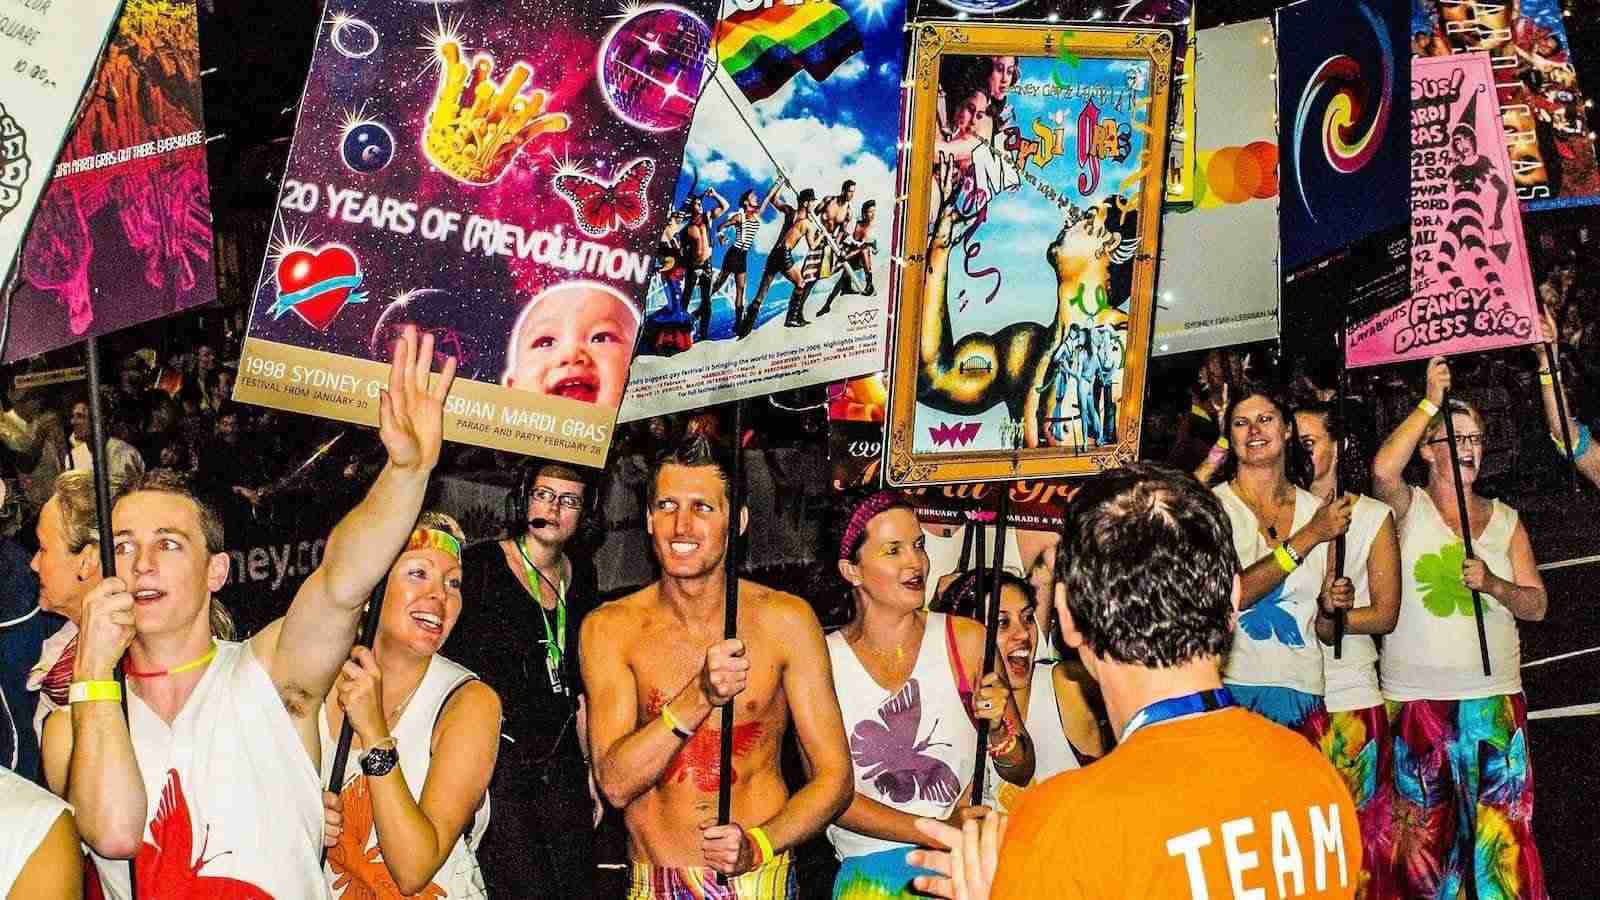 Sydney Mardi Gras one of the best Pride events in the world